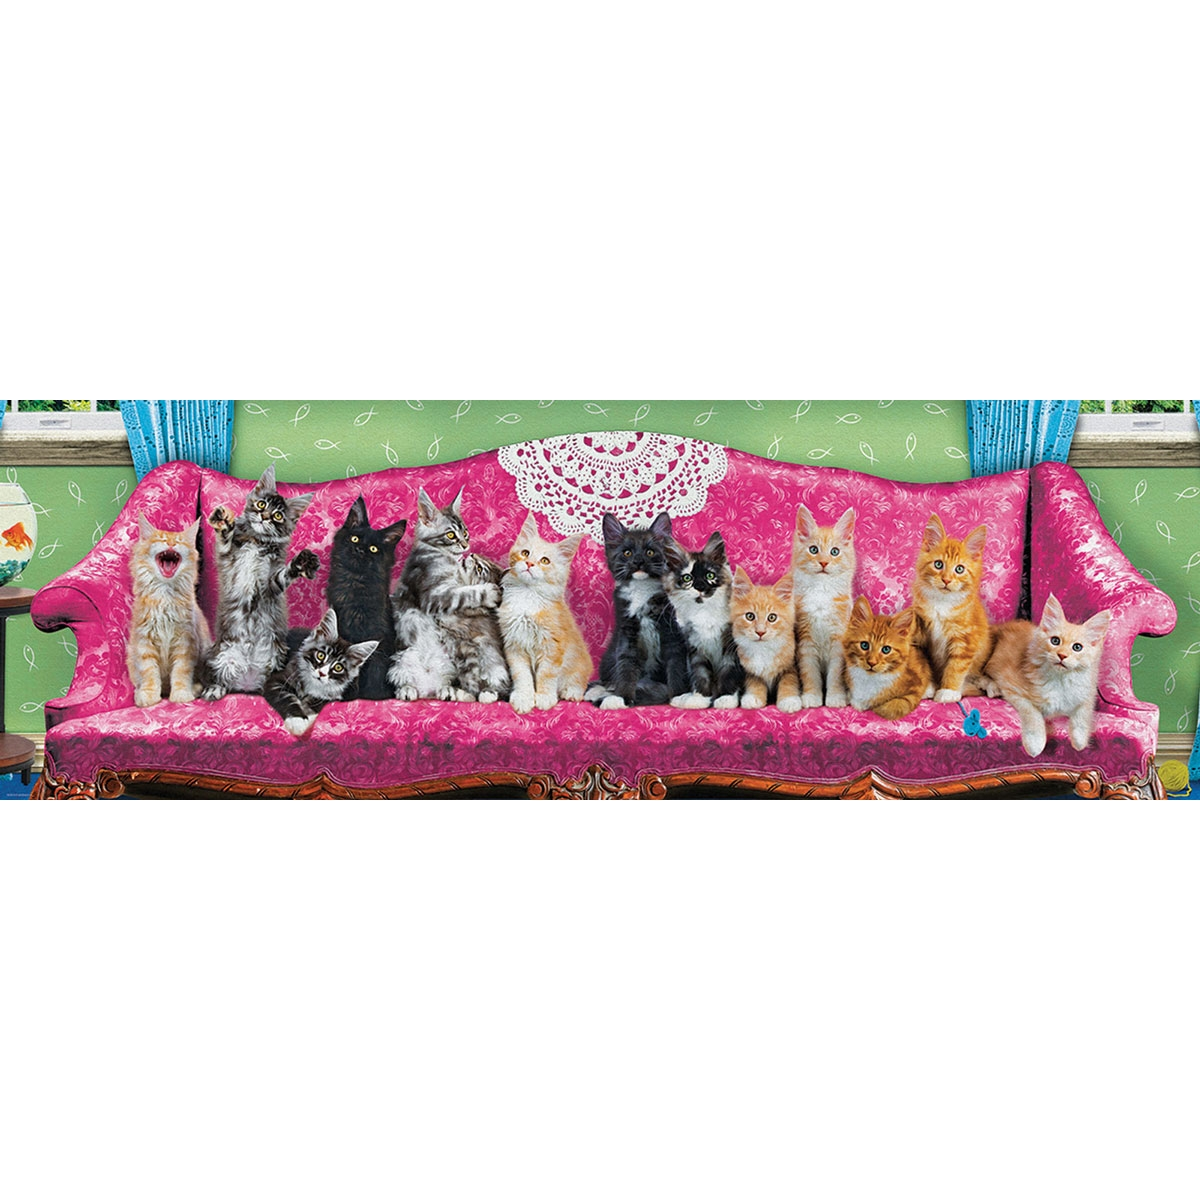 EUROGRAPHICS Panoramapuzzle Kitty Cat Teile - Couch Puzzle 1000